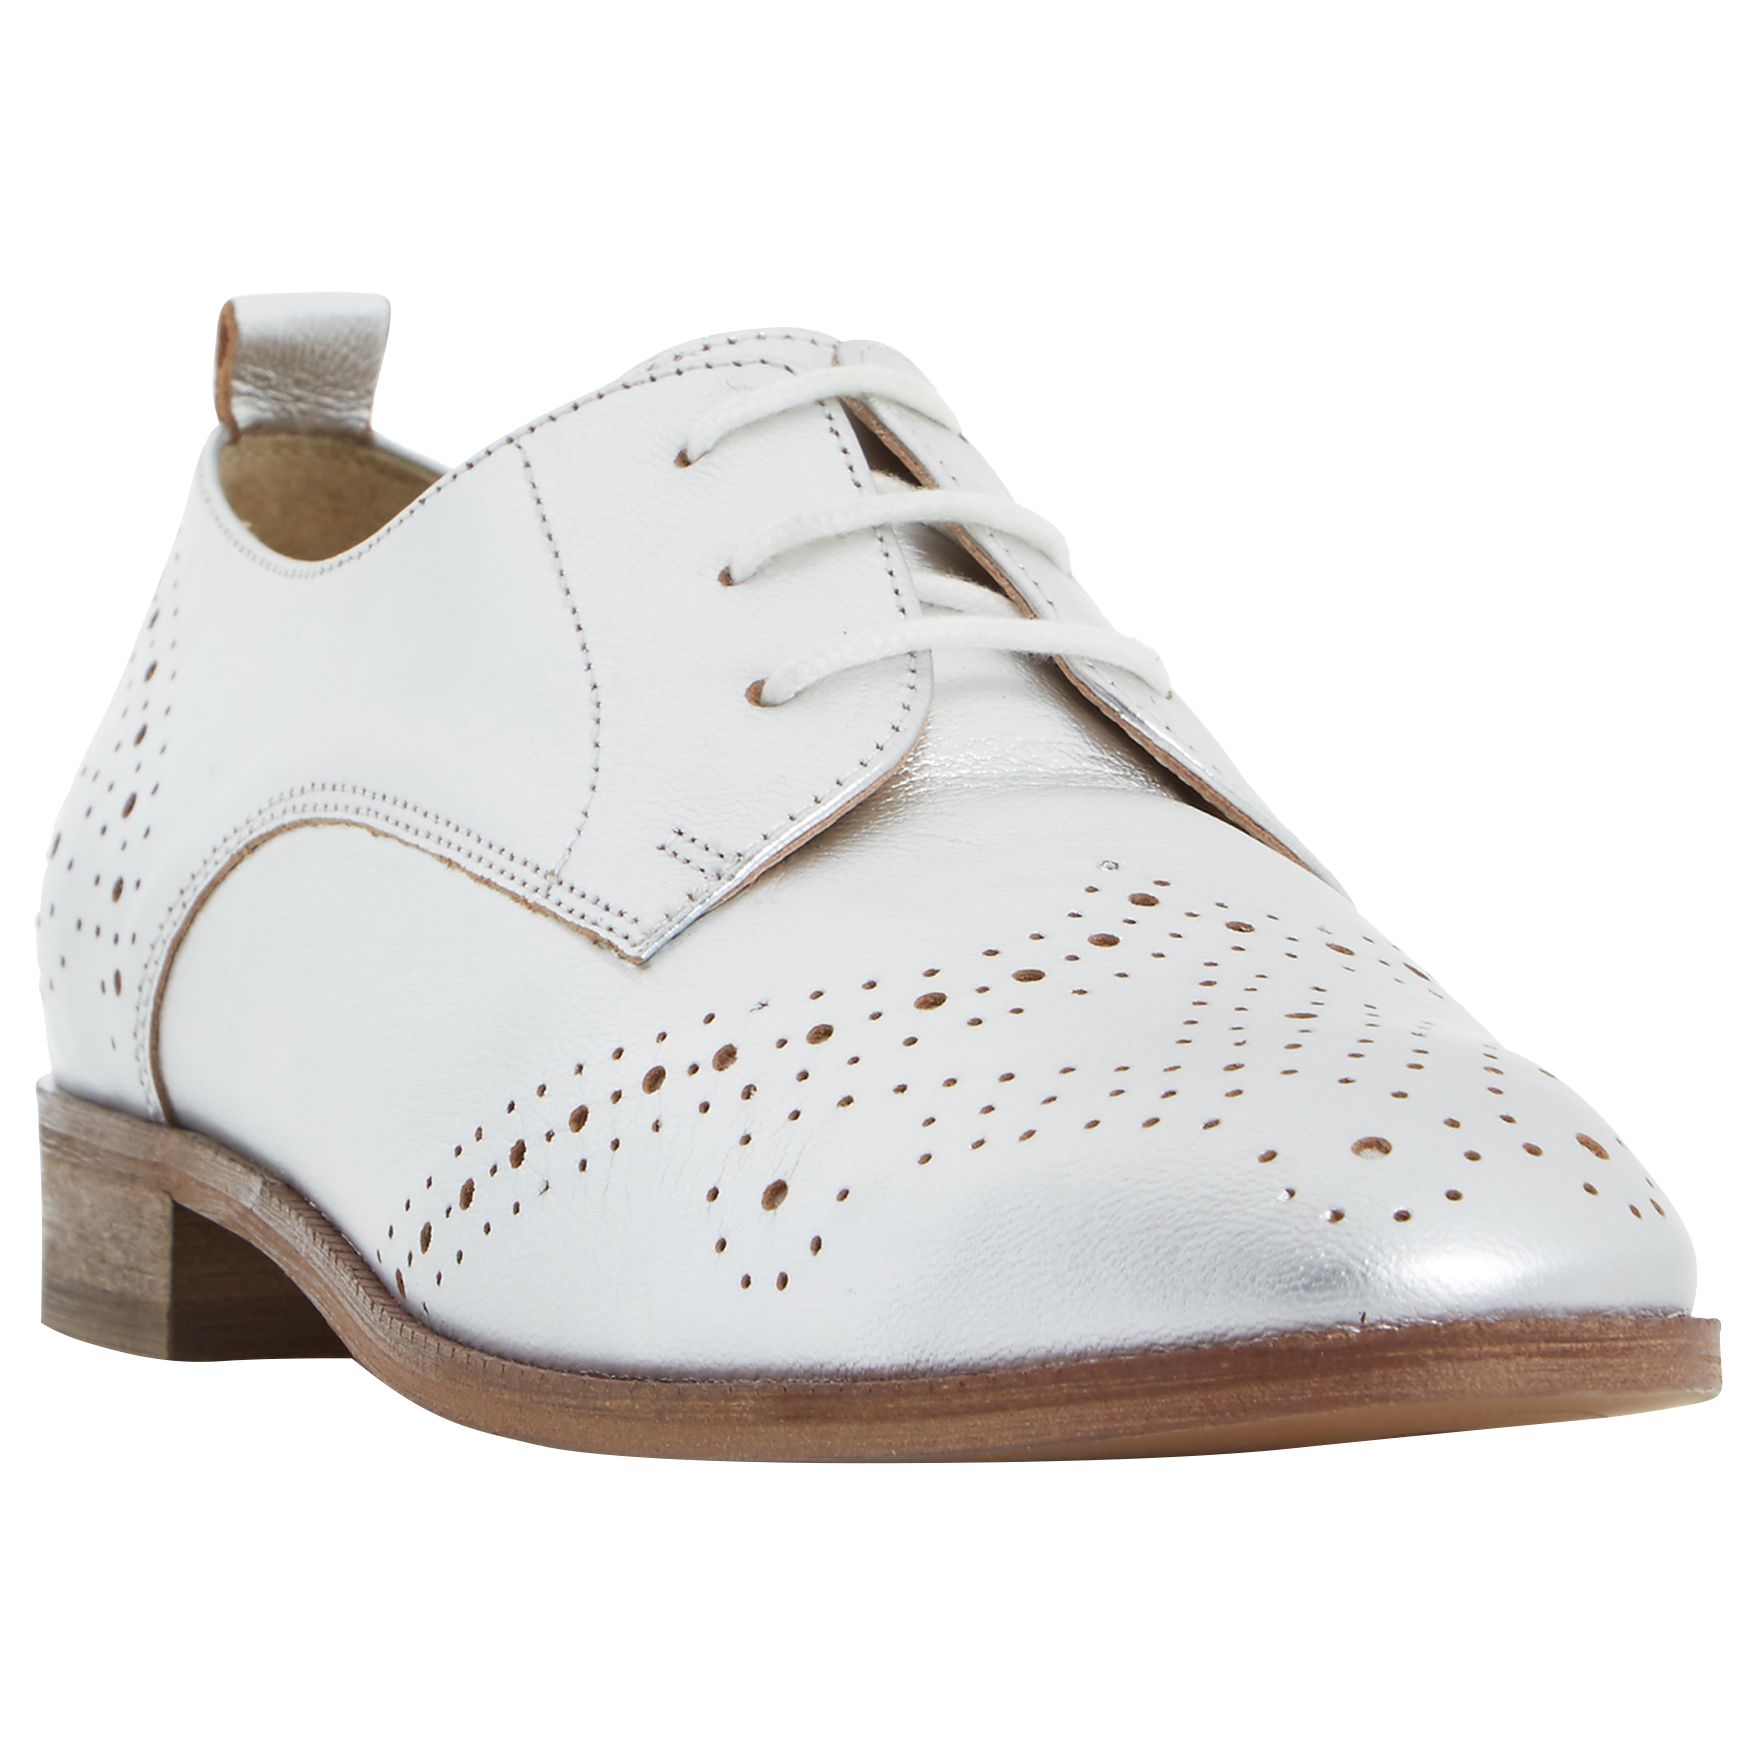 Dune Foster Lace Up Leather Brogues, Silver, 8